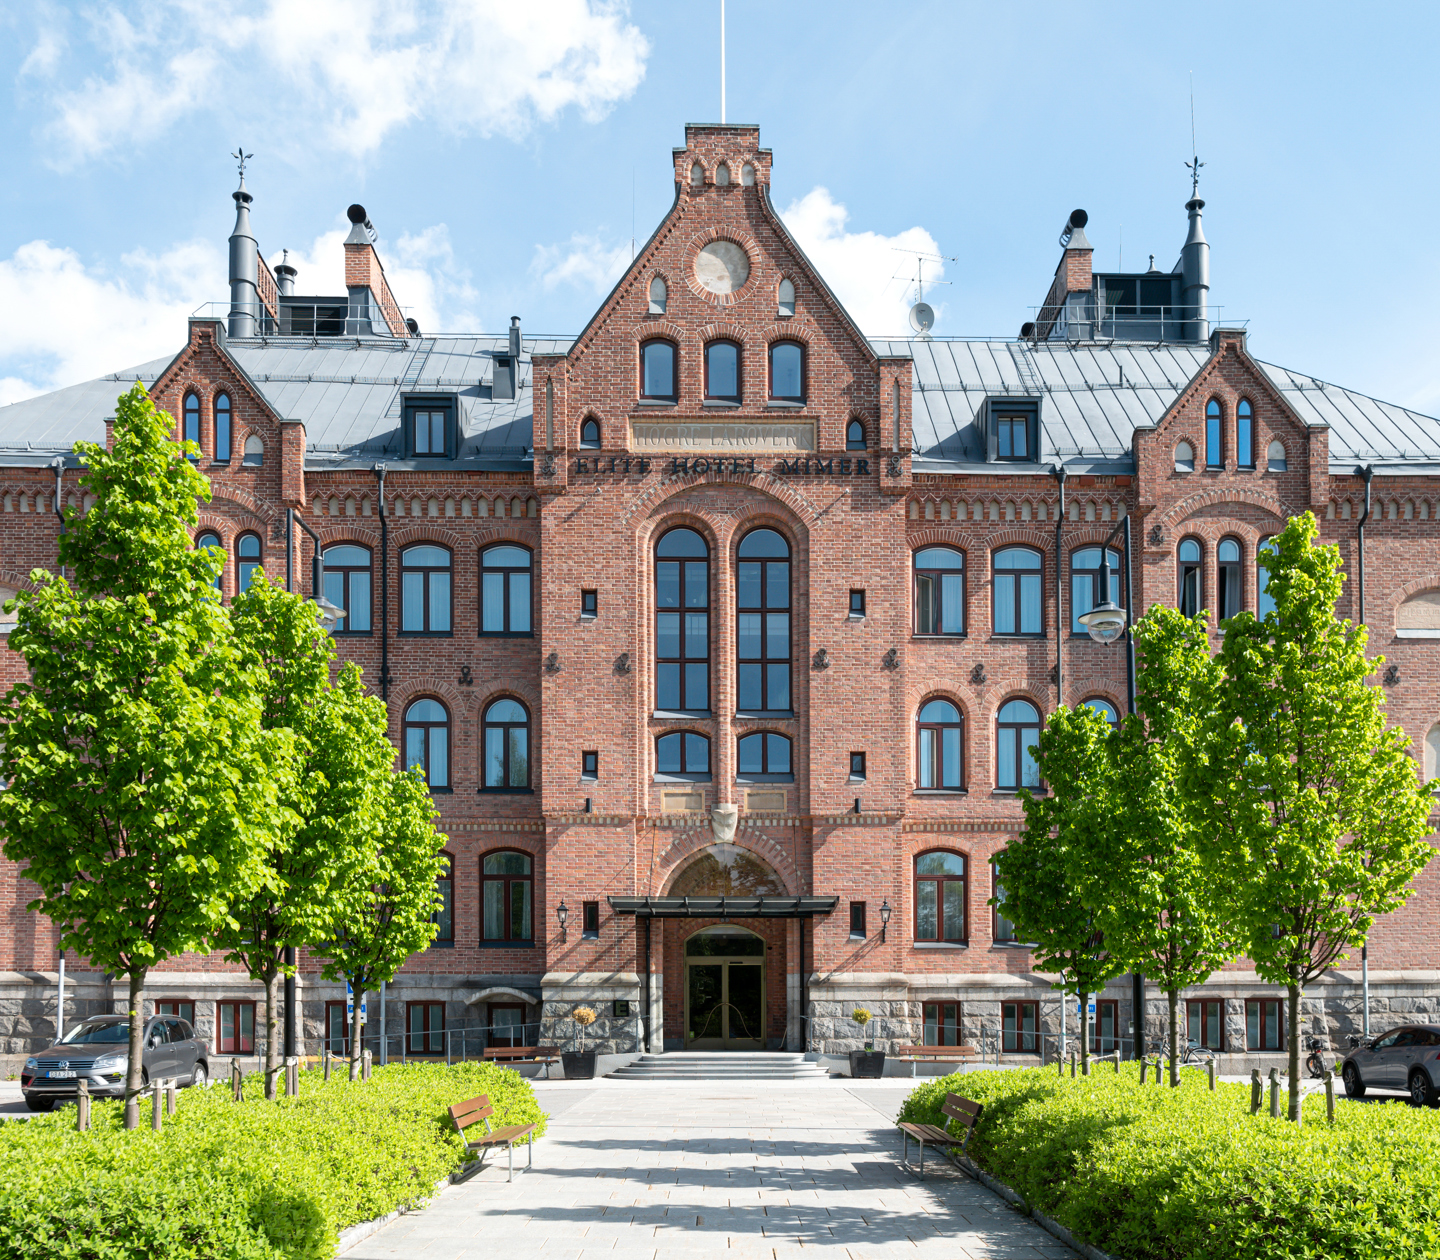 A large castle building in brown-red brick